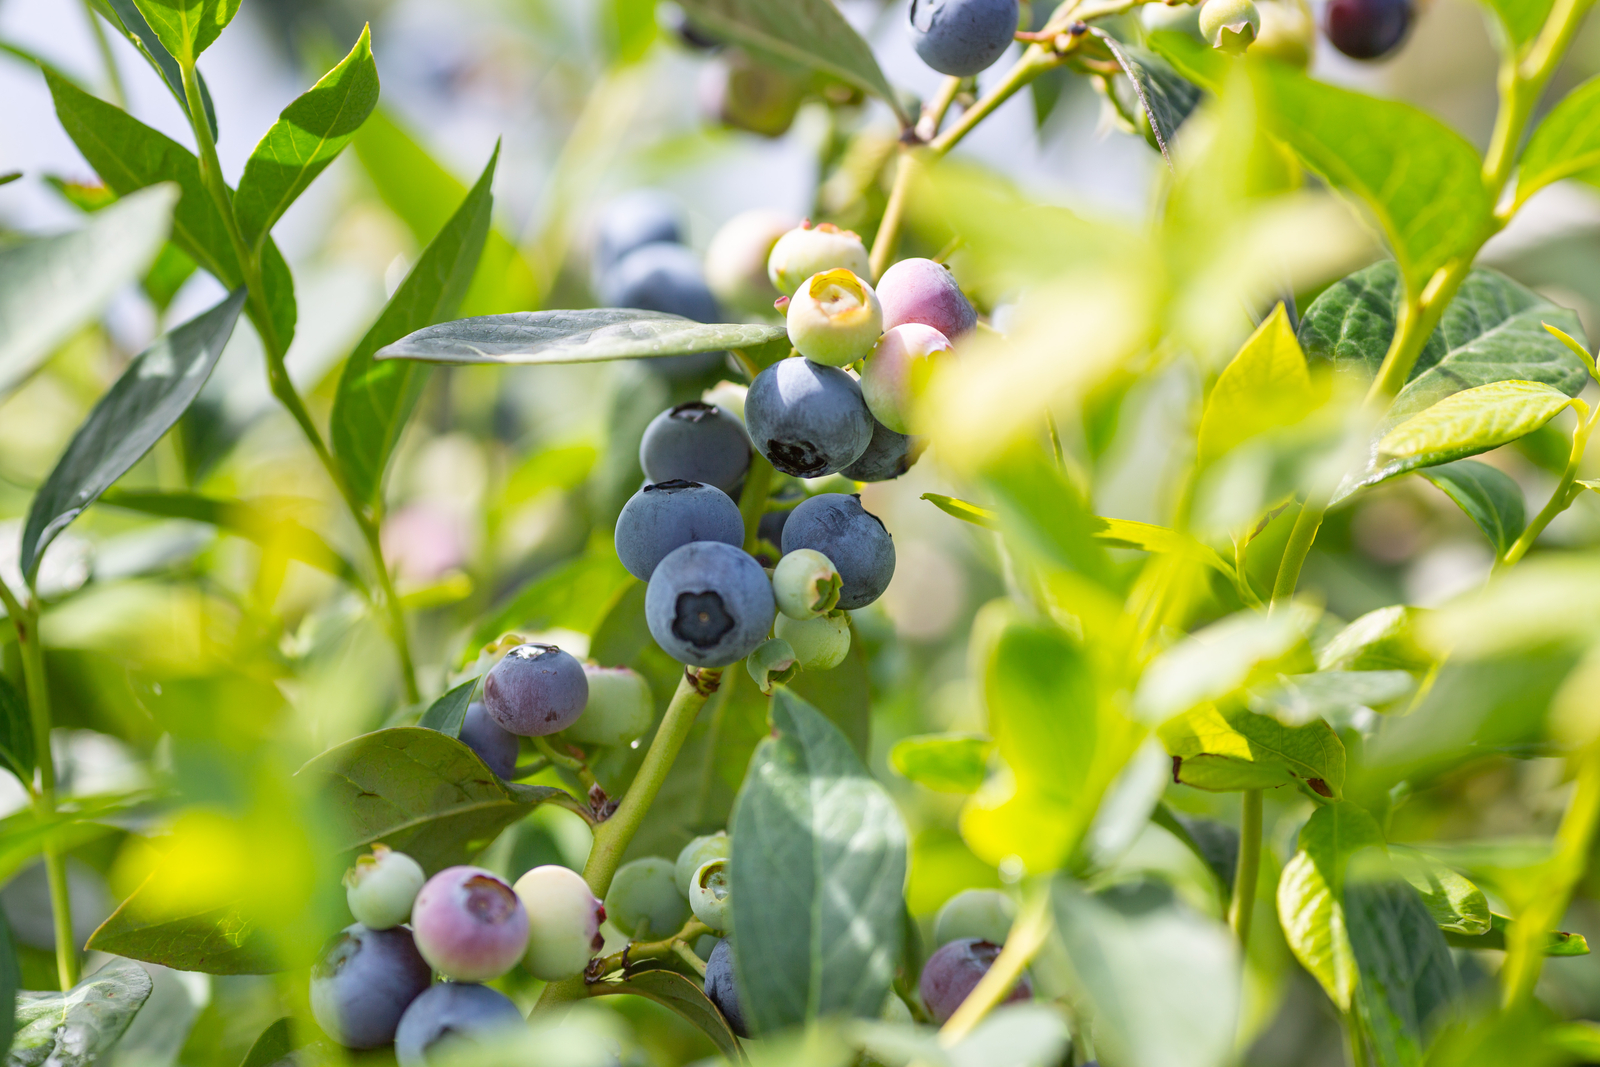 Growing blueberries in a protected environment